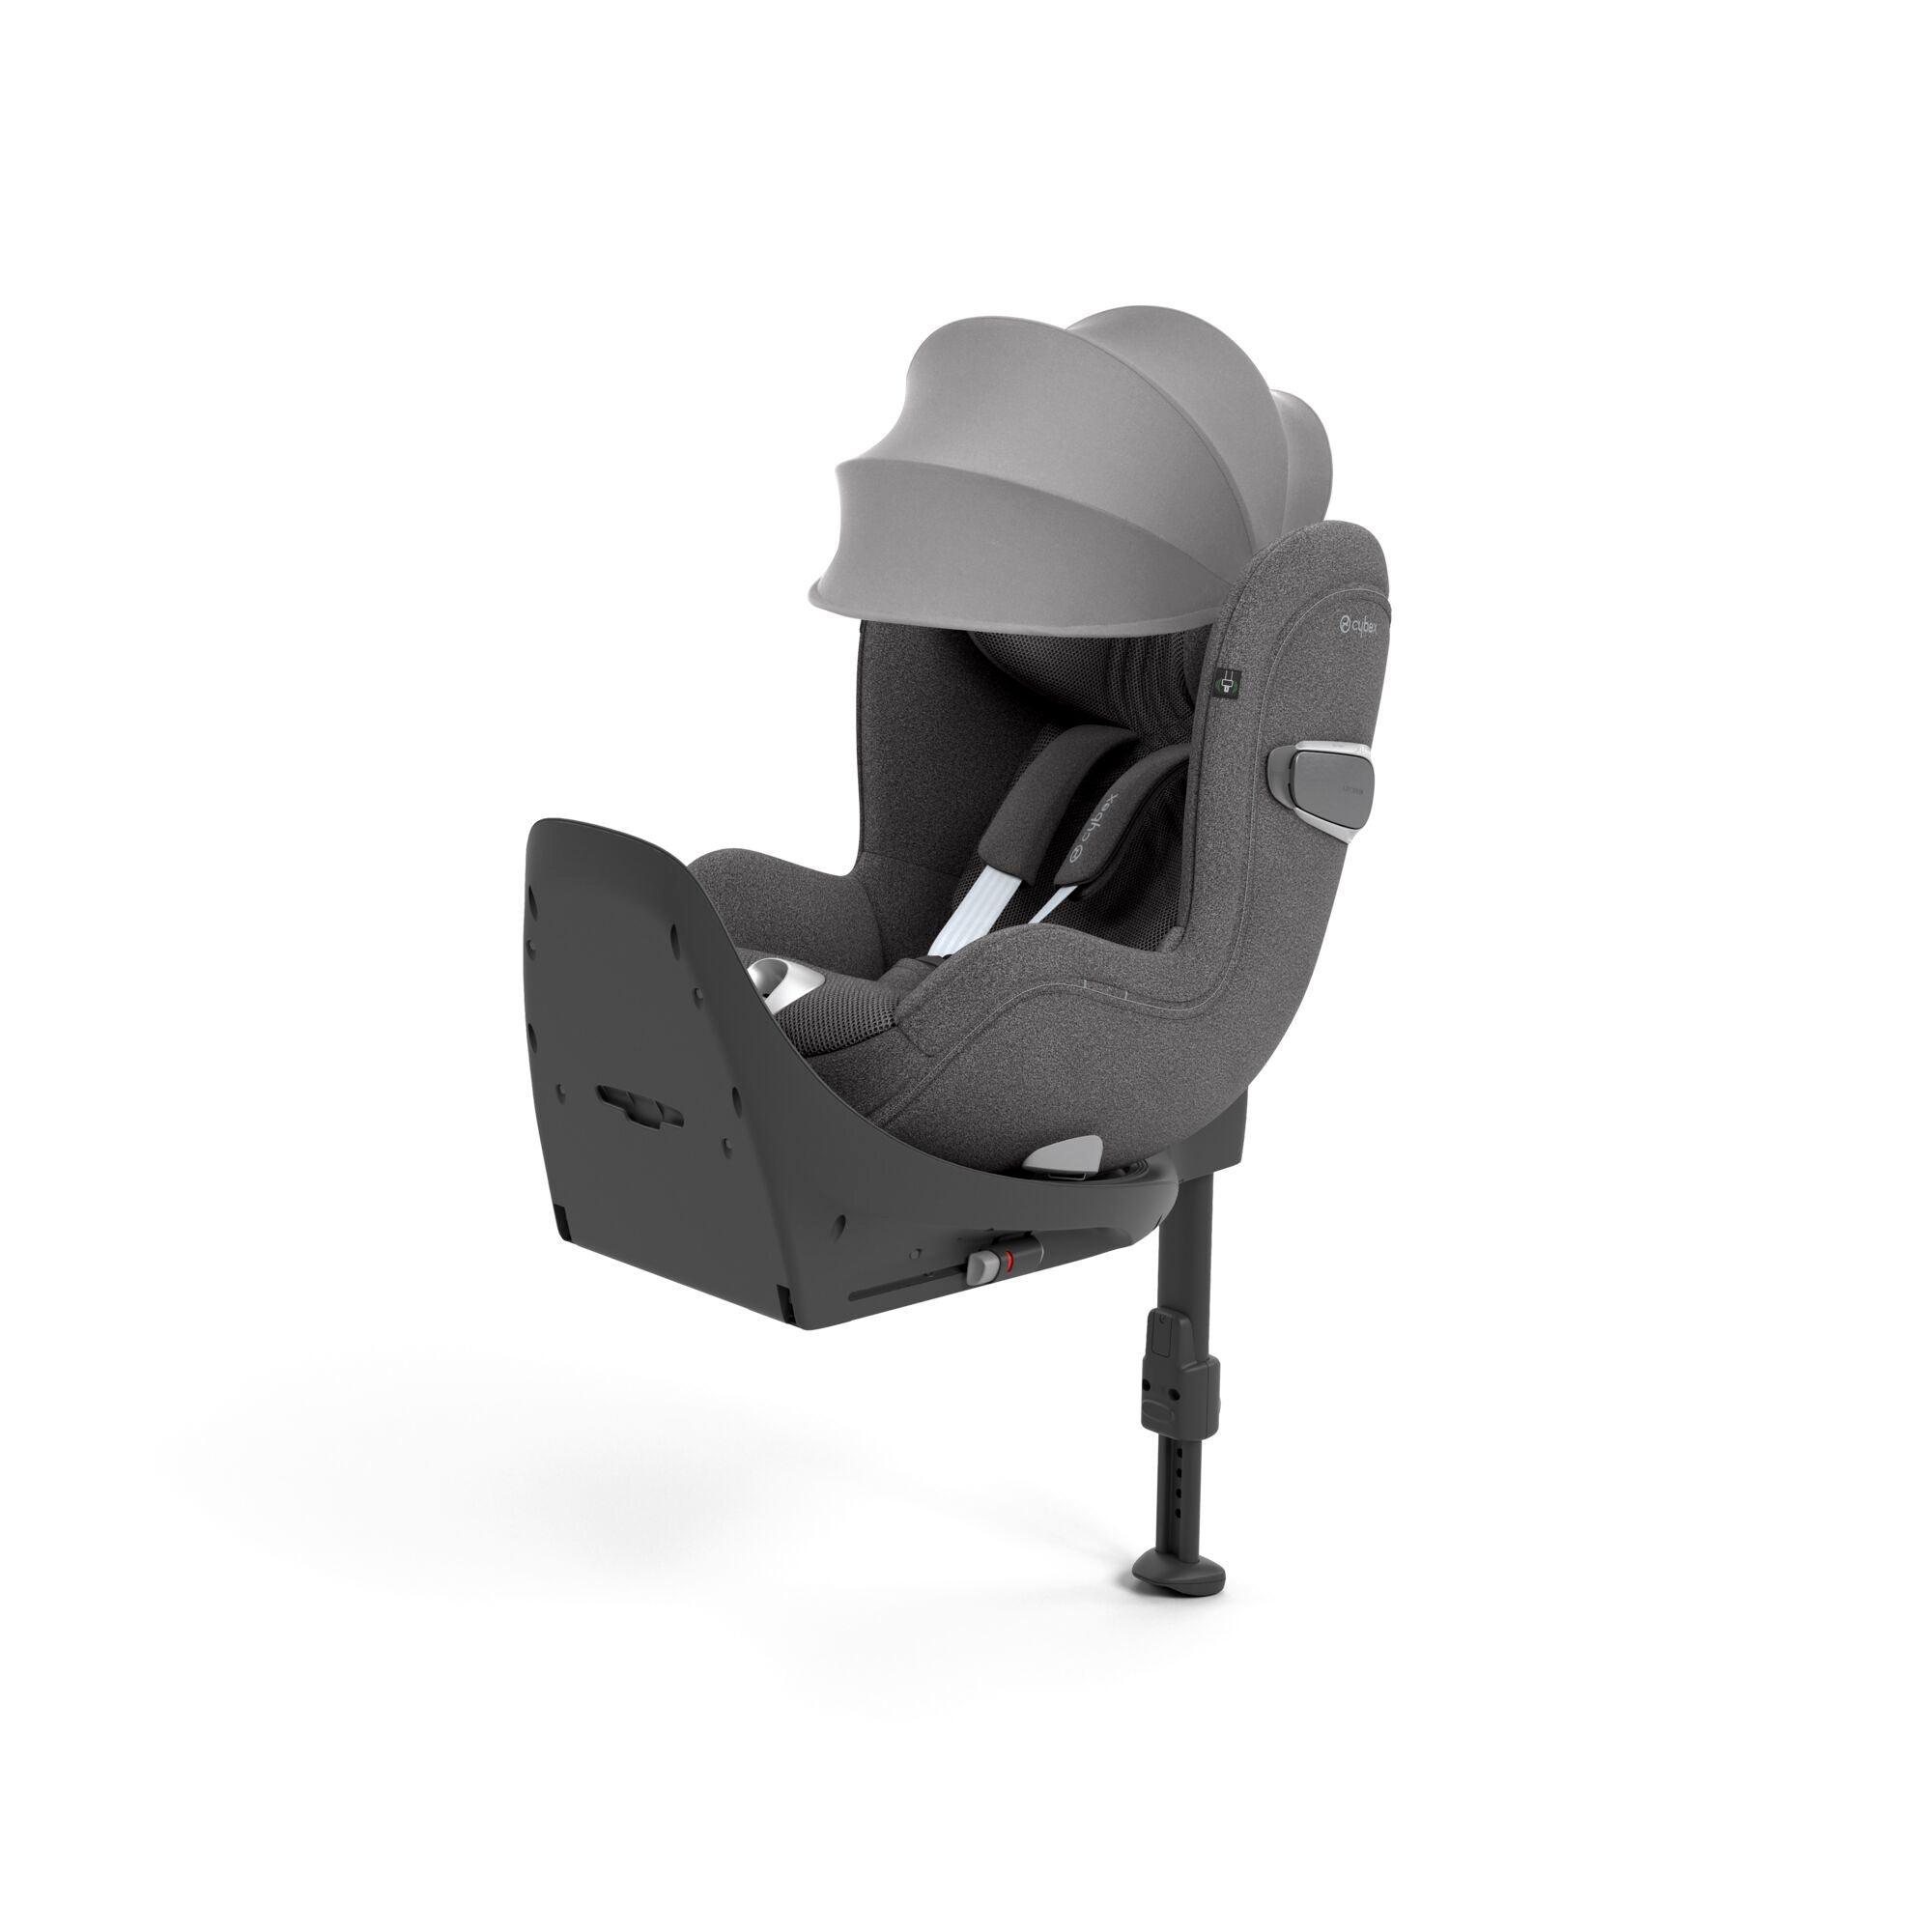 CYBEX Sirona T i-Size Plus in Mirage Grey with integrated sun canopy, presenting a sophisticated charcoal fabric, optimized for infant comfort and safety, with a sturdy base and leg support.